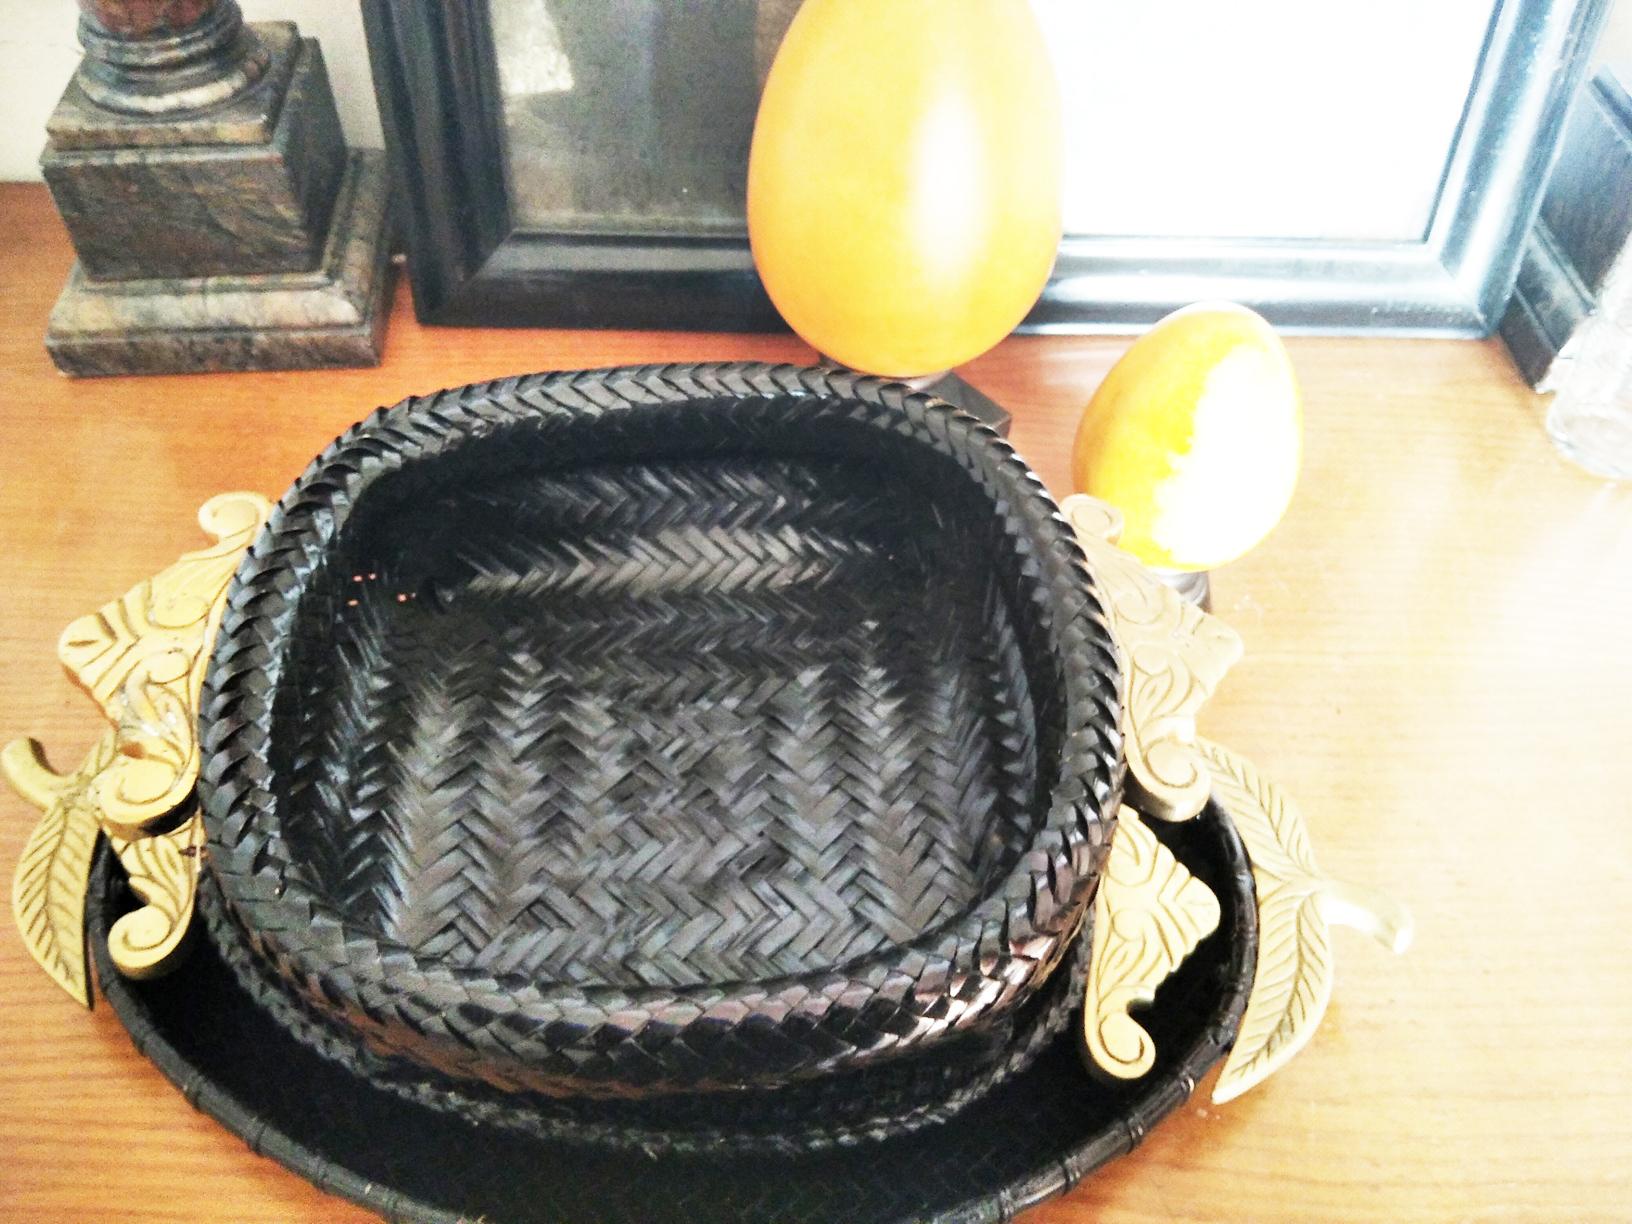 Trays Black Rattan and Brass Handles Oriental Origin 3 Pieces, Mid 20th Century For Sale 2